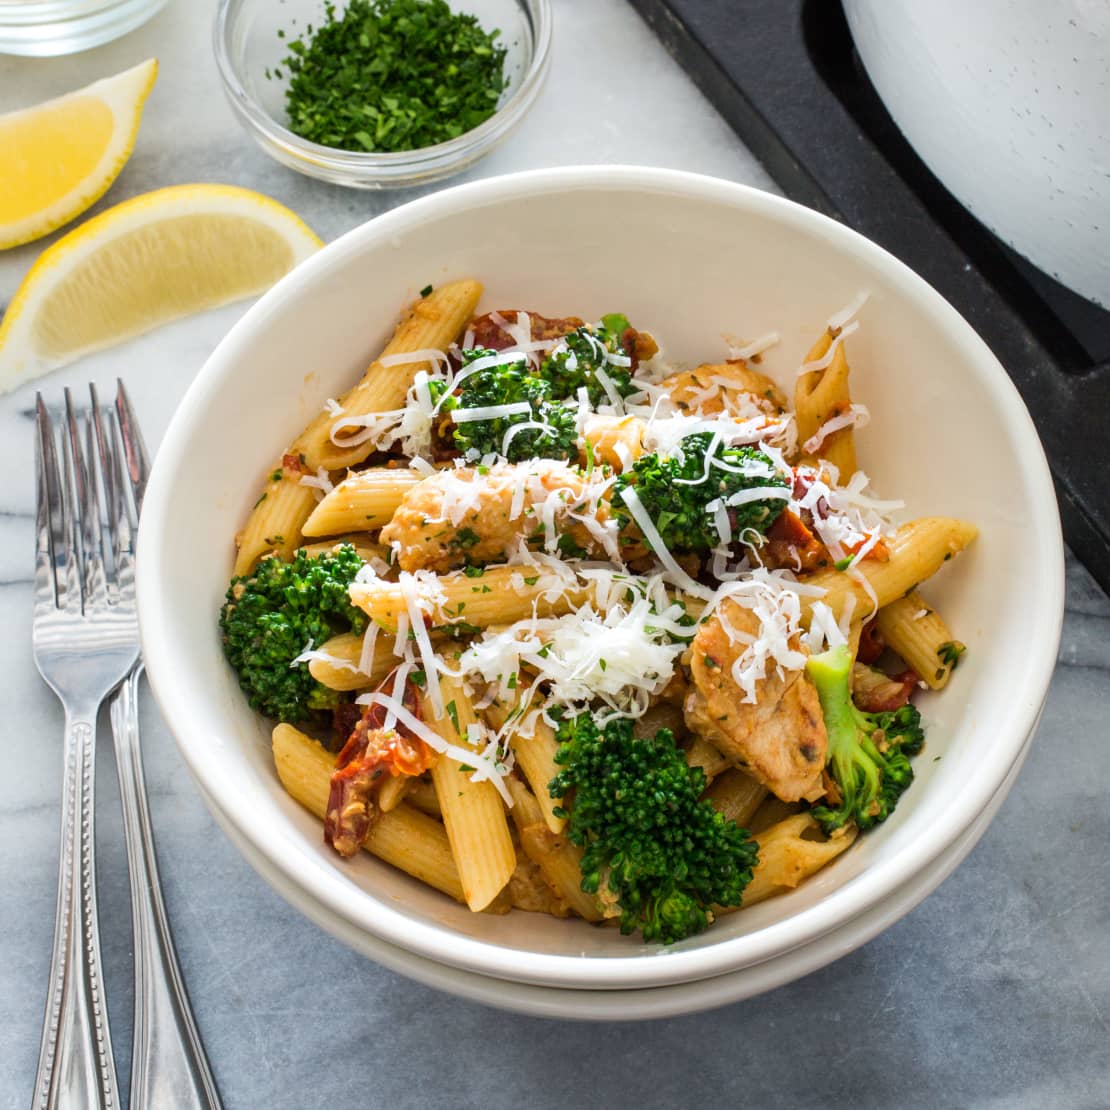 Pasta with Chicken, Broccoli, and Sun-dried Tomatoes